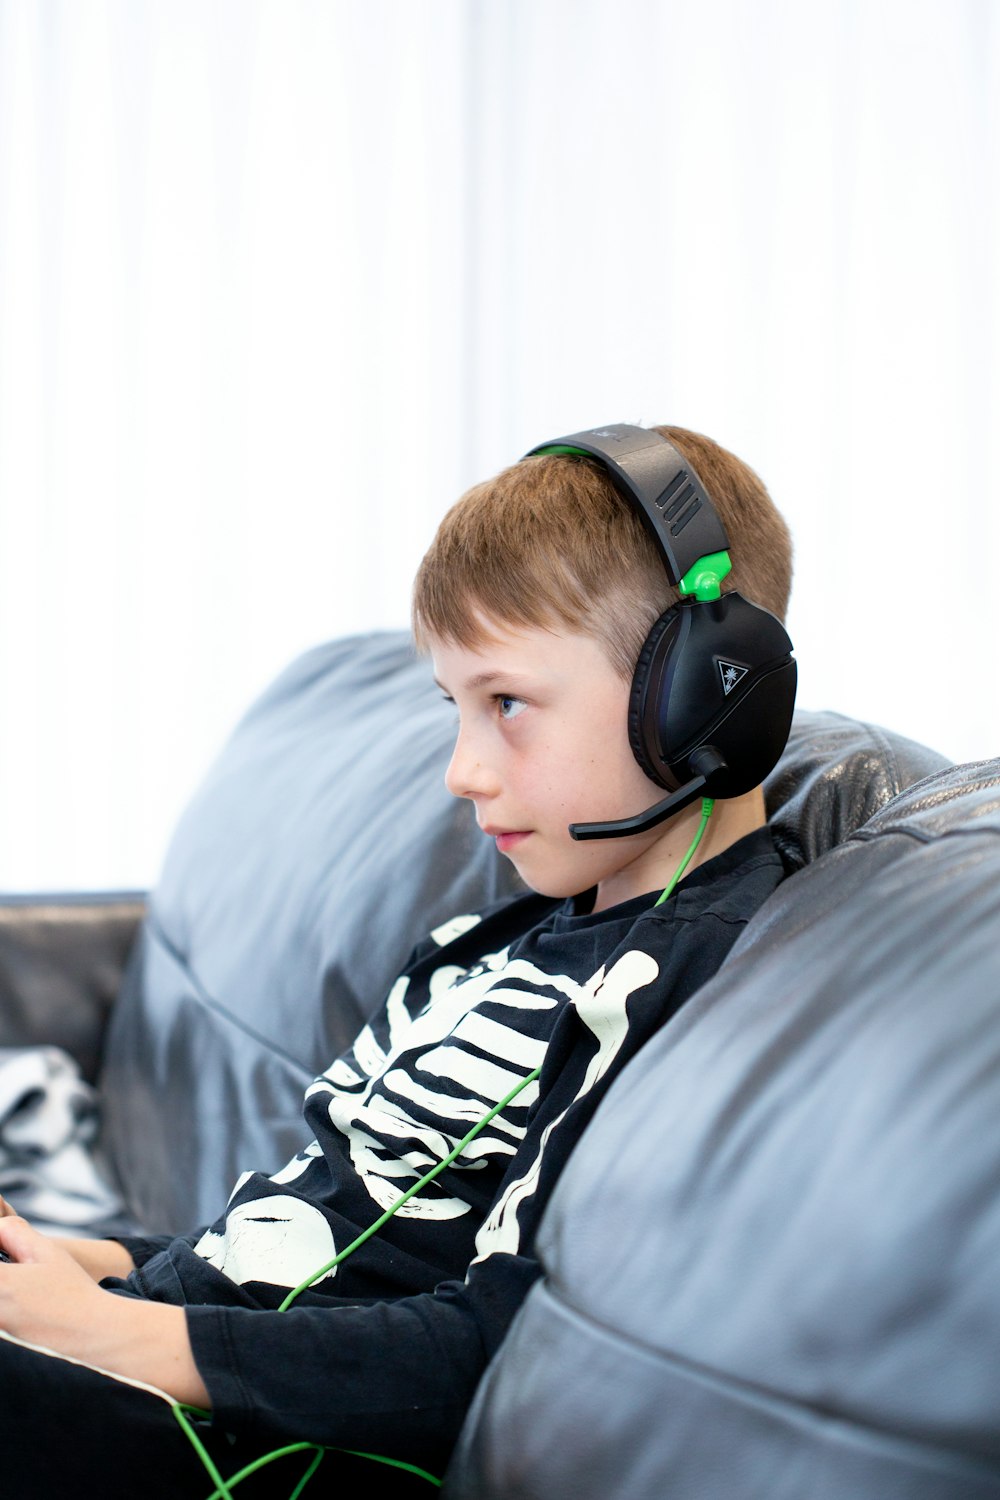 a young boy wearing headphones sitting on a couch